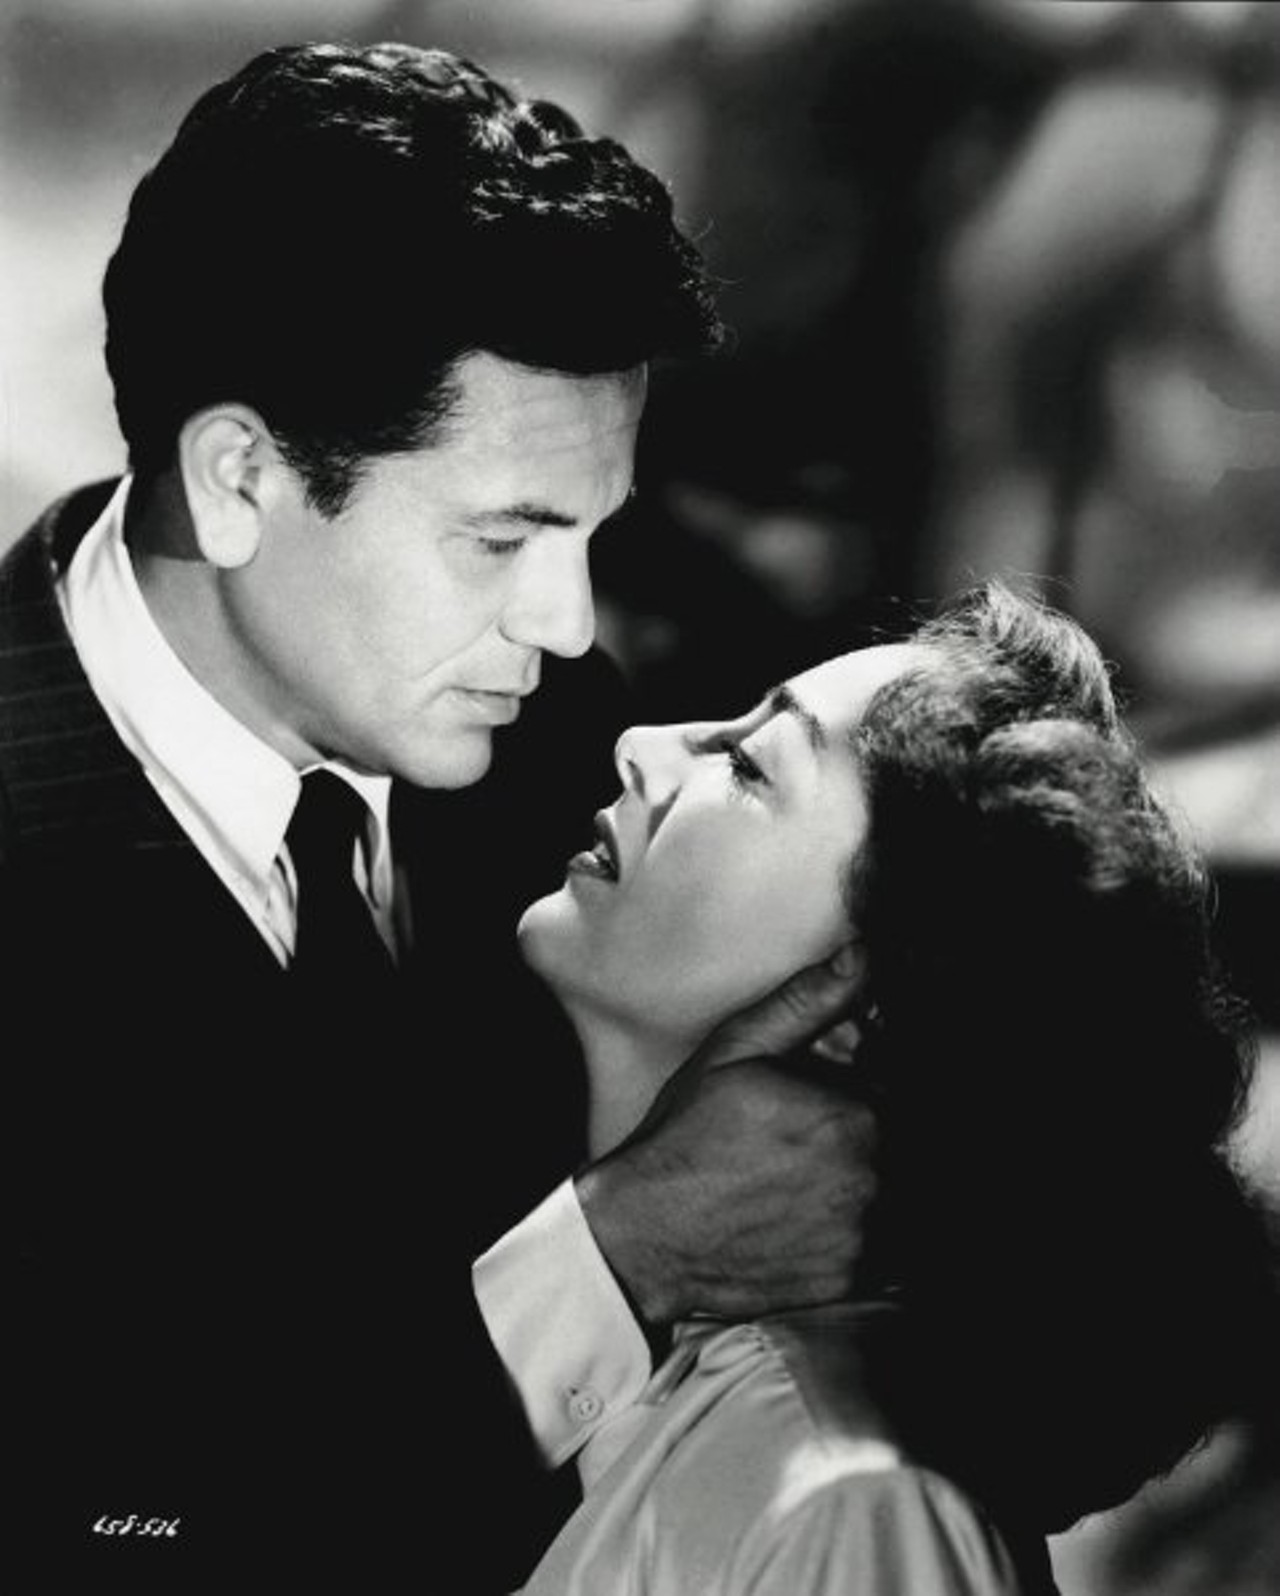 "This is the story of three violent and demanding loves," says the narrator in the trailer for Humoresque, a 1947 film that stars Joan Crawford, John Garfield and Oscar Levant. Designed to complement the Cleveland Museum of Art's Masters of the Violin concerts, the movie centers on a young violinist who tries to strike up a relationship with a much wealthier woman. Violin master Isaac Stern can be heard on the soundtrack. A restored 35mm print of the film shows at the Cleveland Museum of Art today at 1:30 p.m. Tickets are $9. (Niesel)